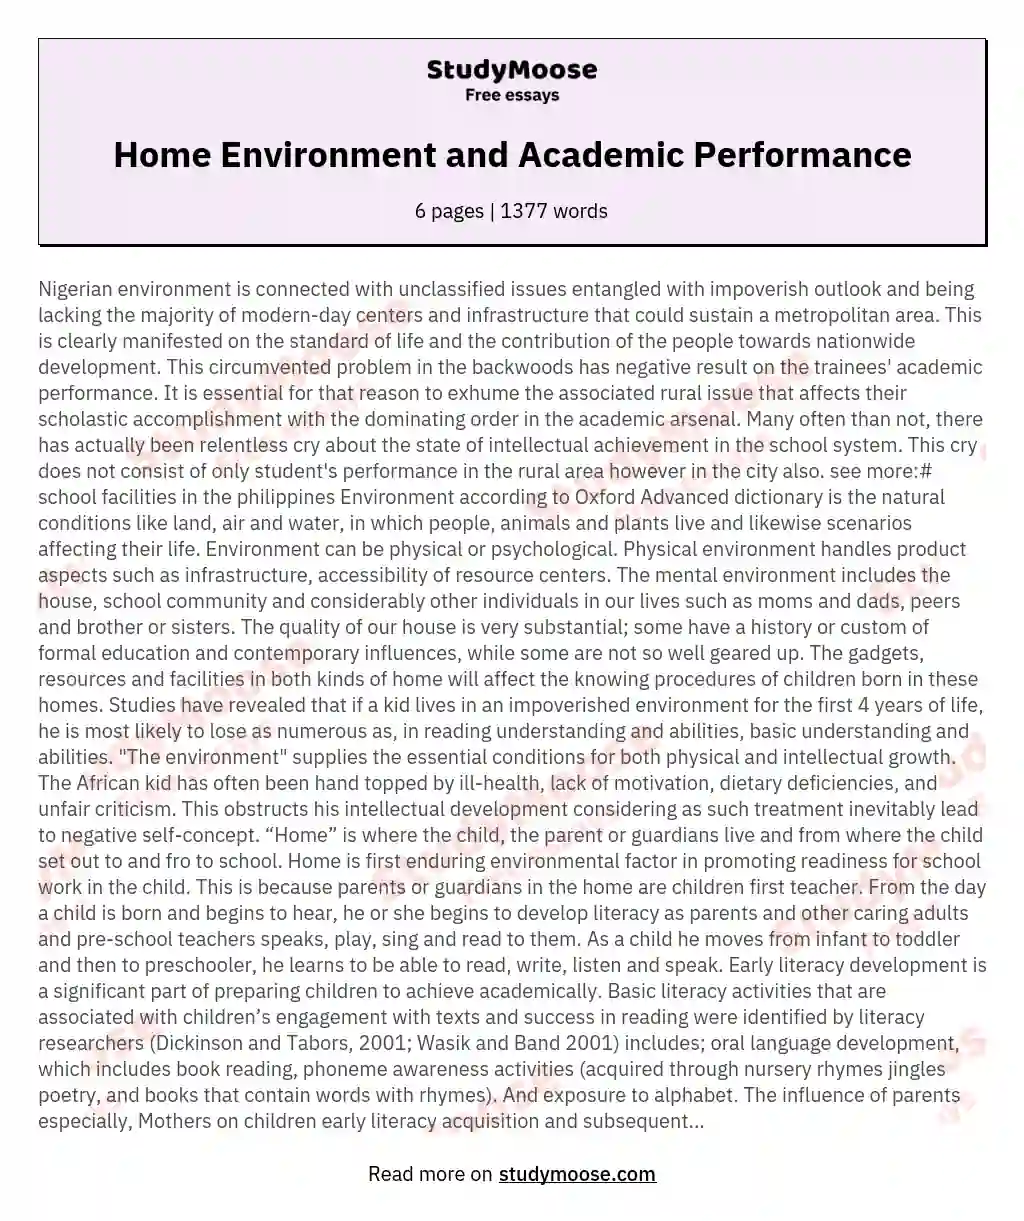 Home Environment and Academic Performance essay